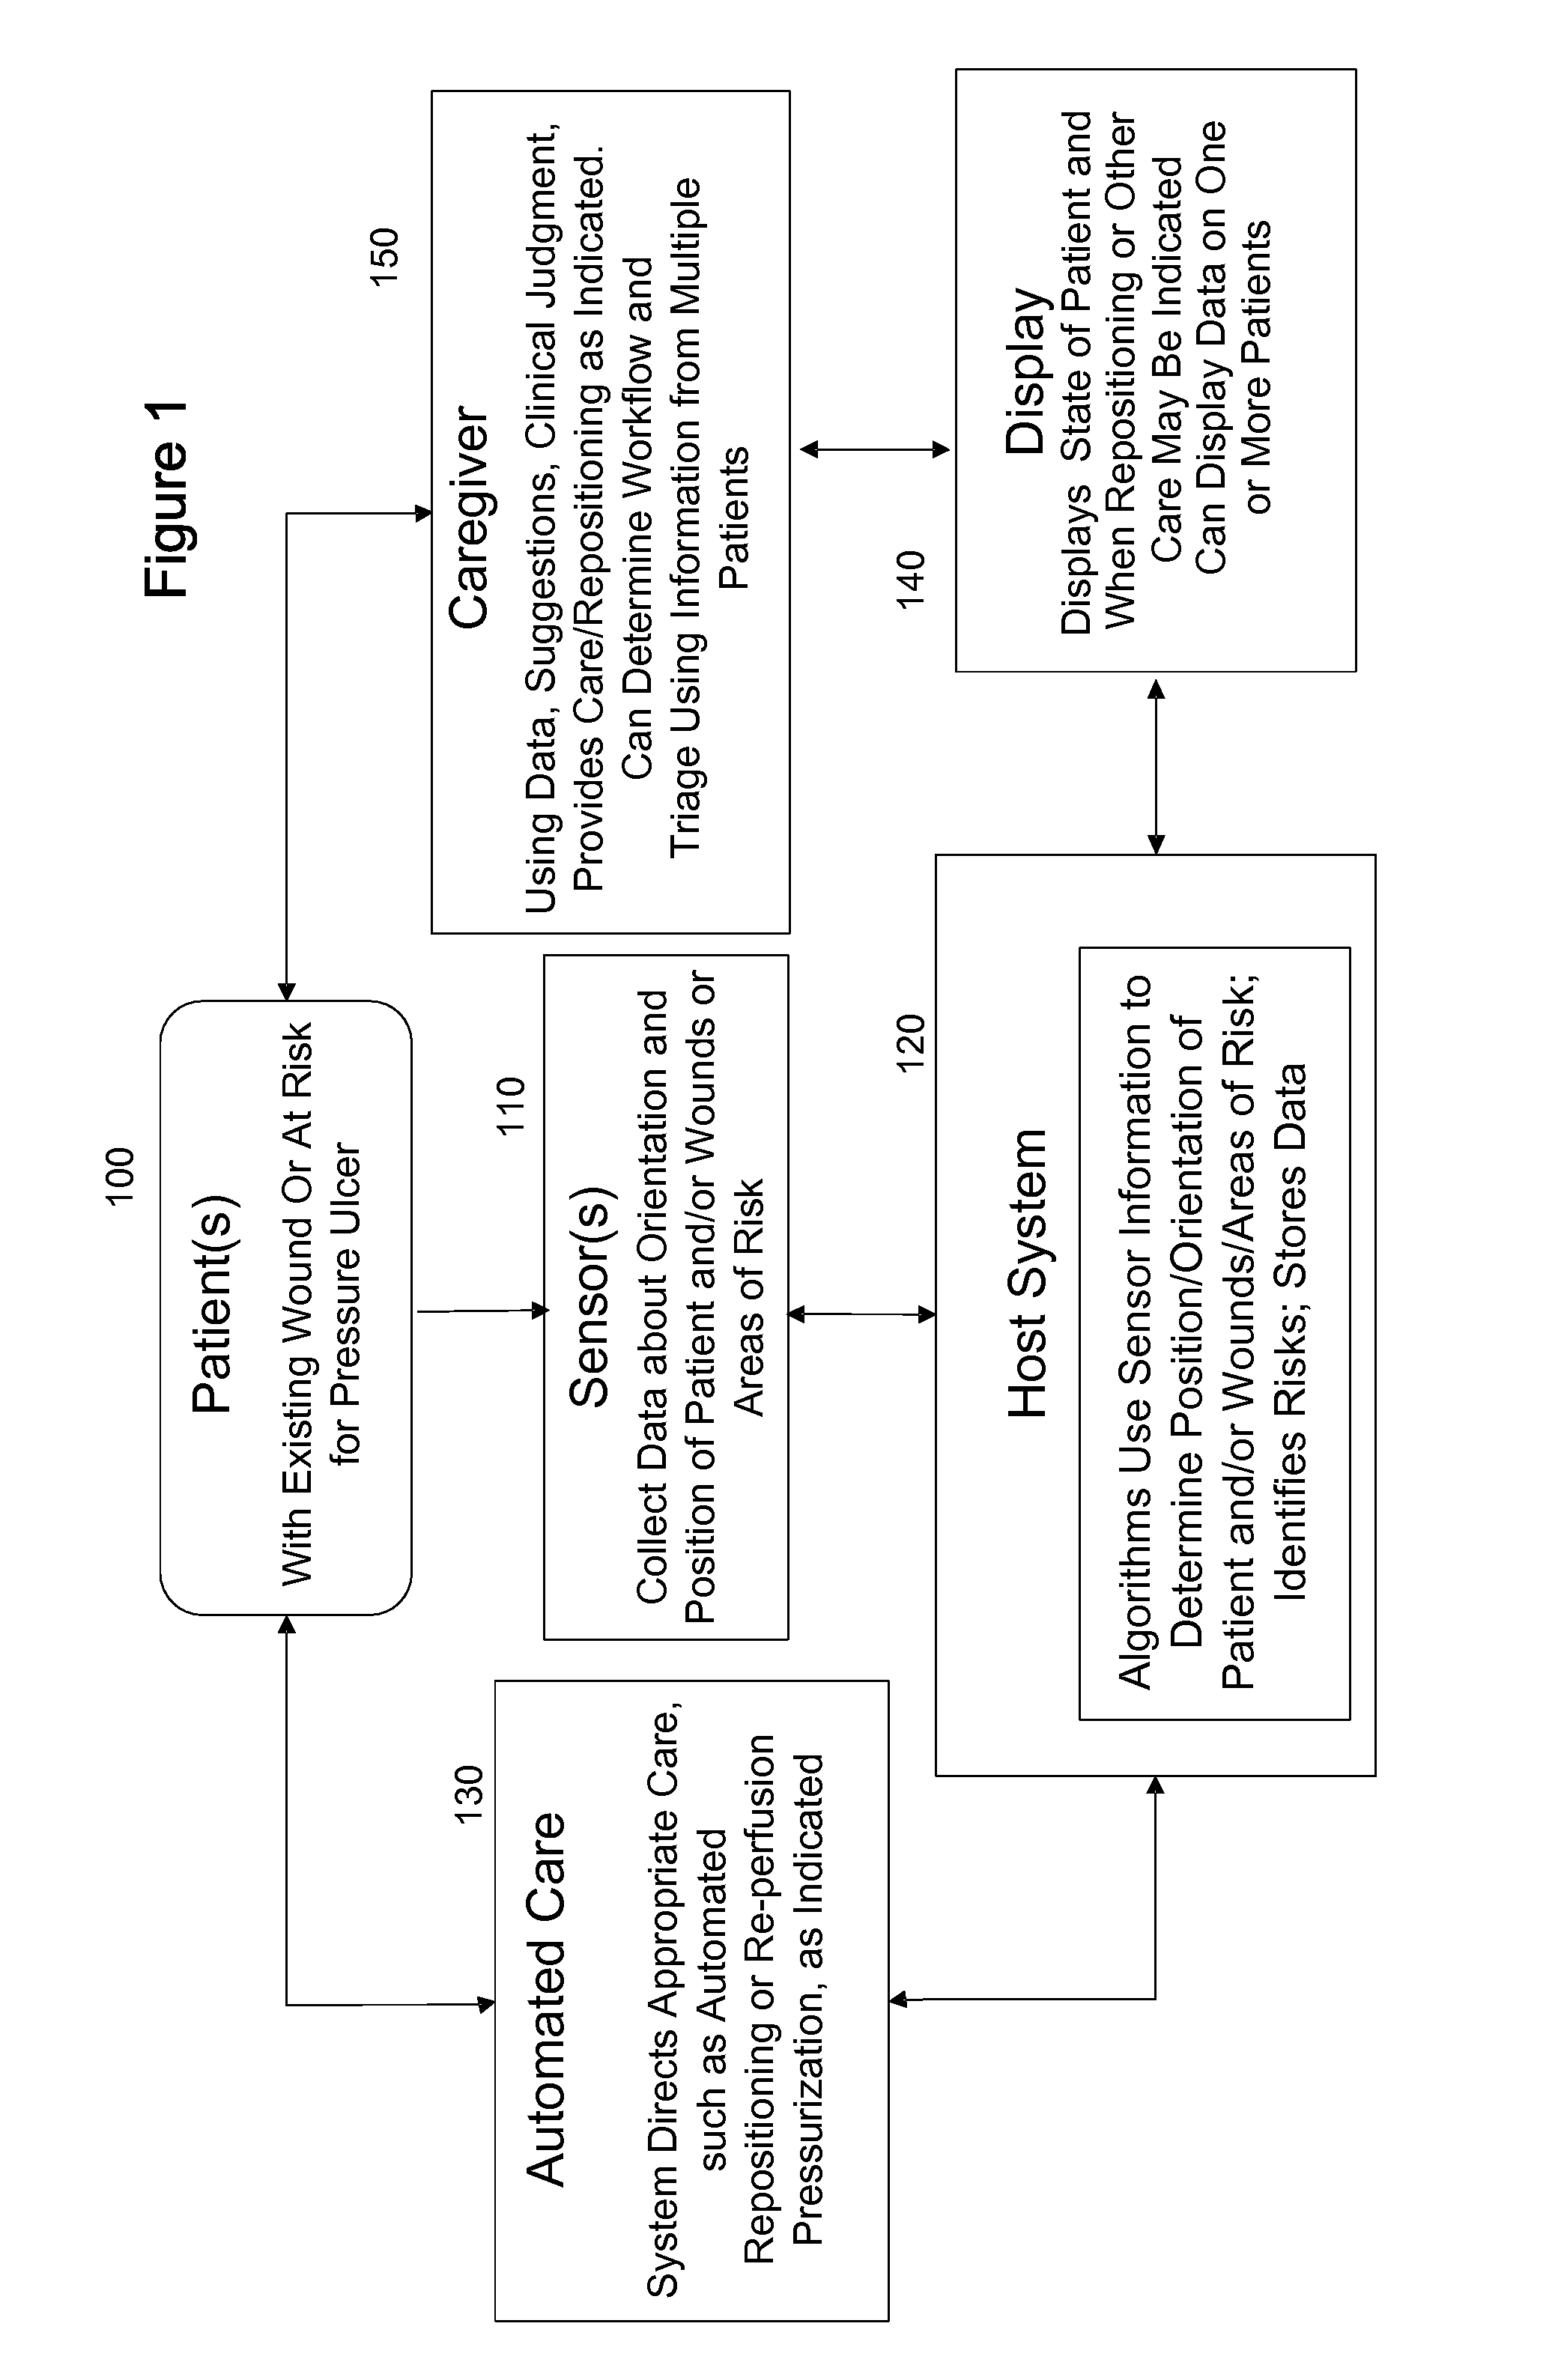 Systems, devices and methods for preventing, detecting and treating pressure-induced ischemia, pressure ulcers, and other conditions